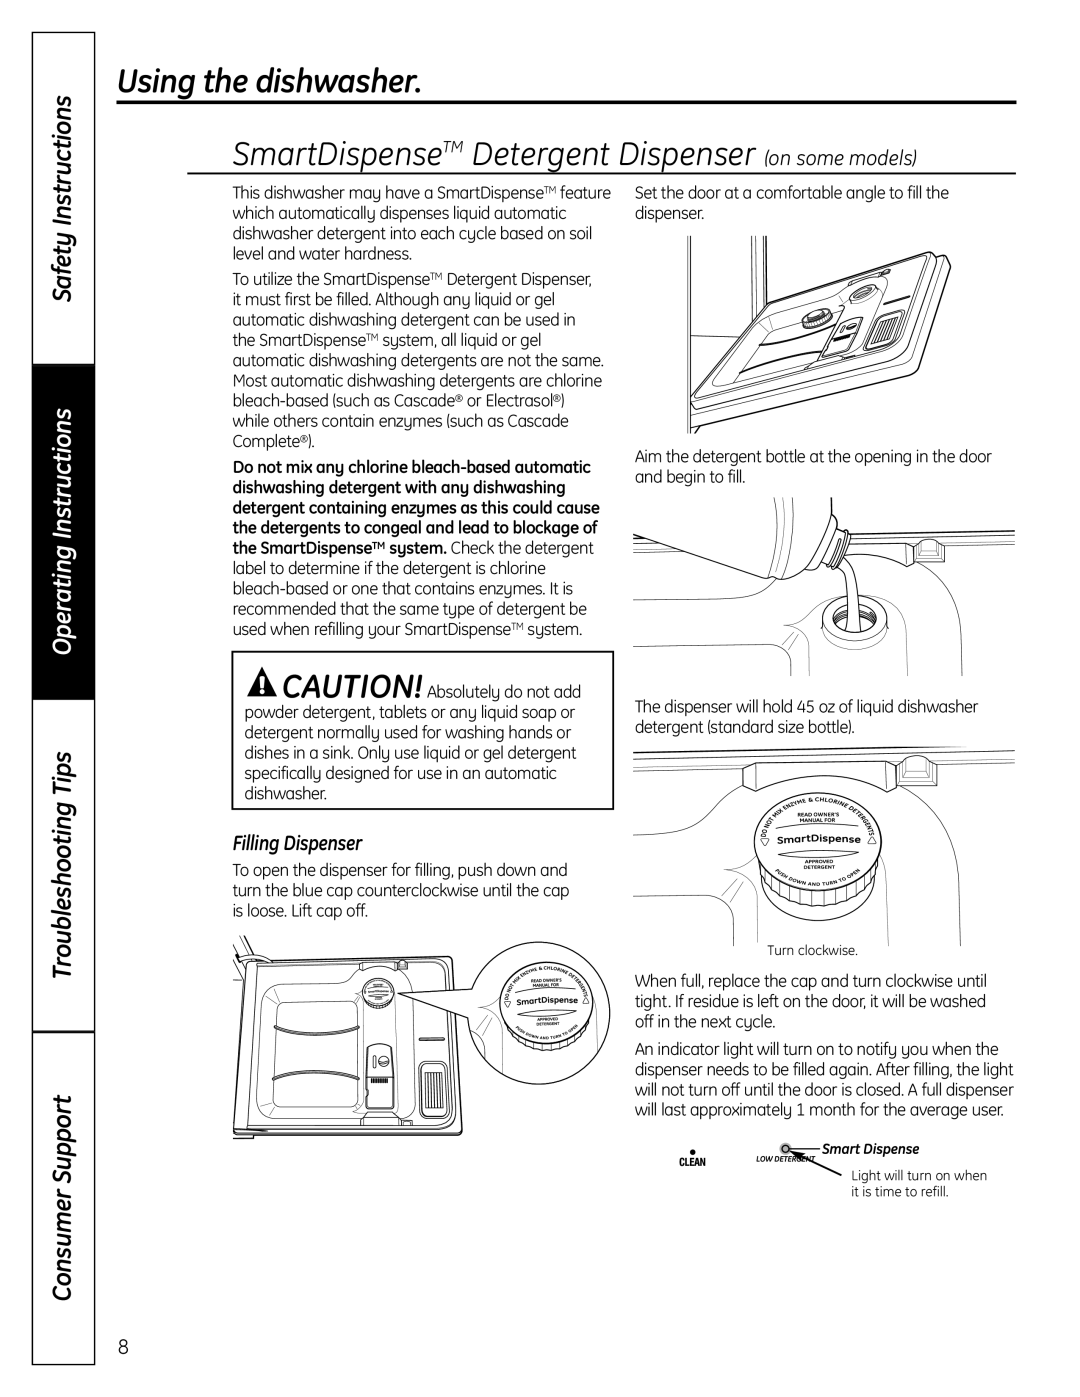 GE GSD6900 Troubleshooting Tips Support, Consumer, Filling Dispenser, Using the dishwasher, Instructions, Safety 